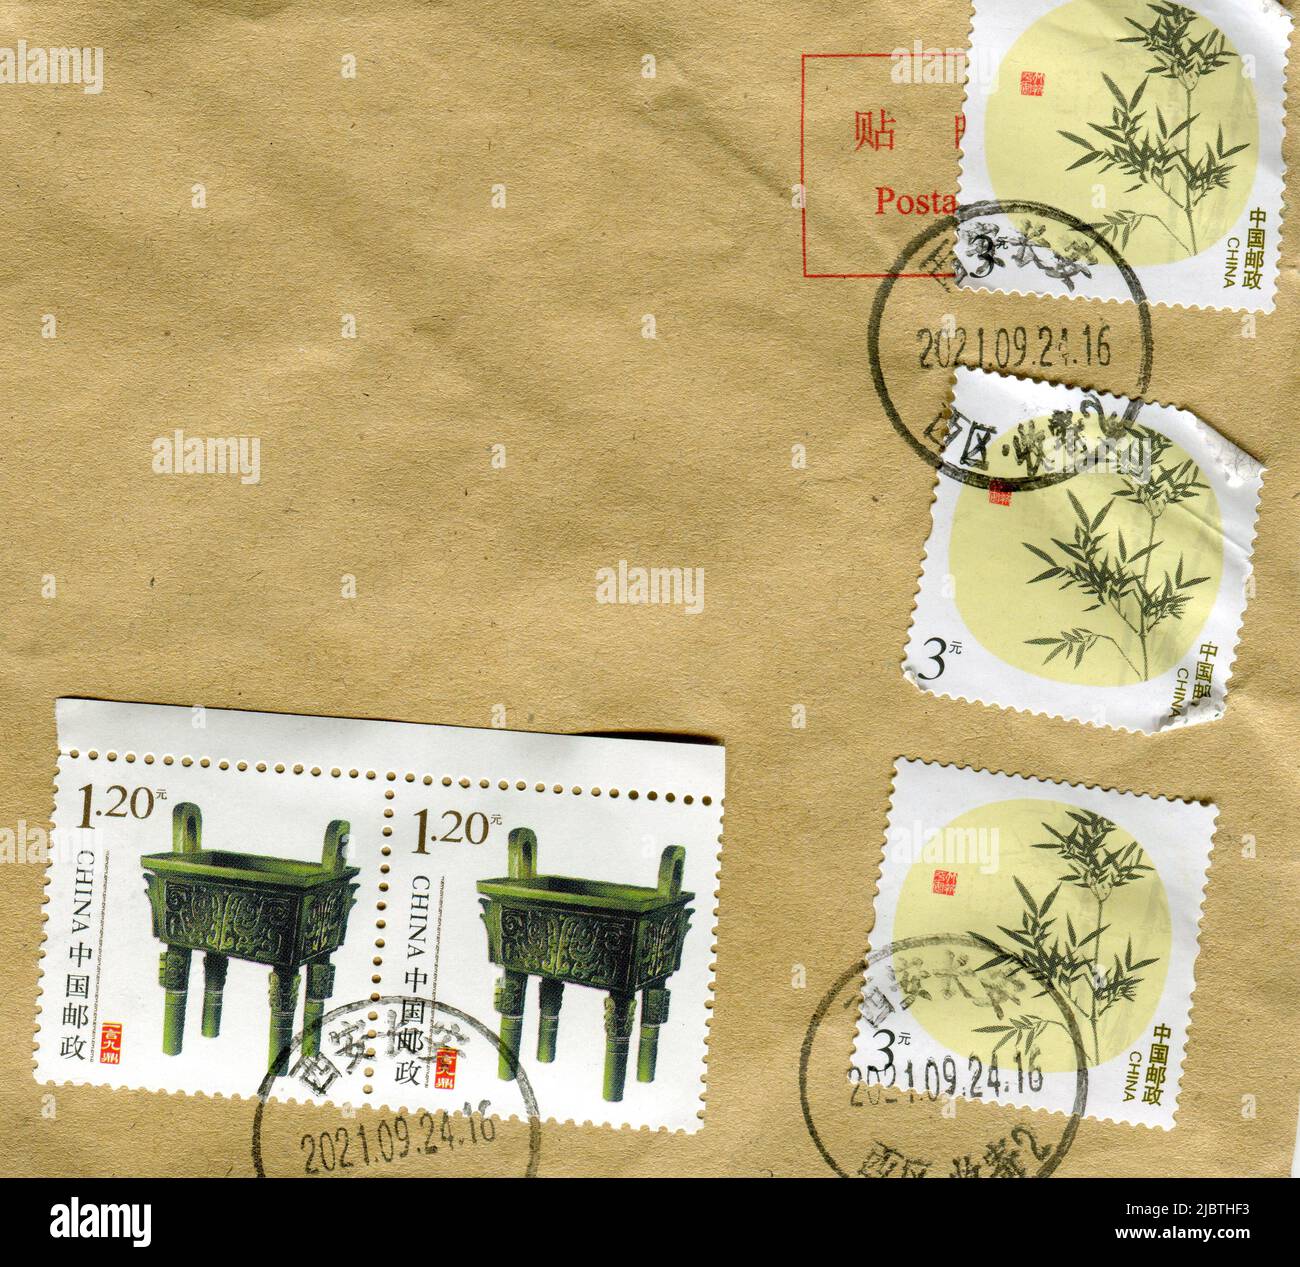 Stamp printed in China shows image of the Antique and Bamboo, circa 2021. Stock Photo